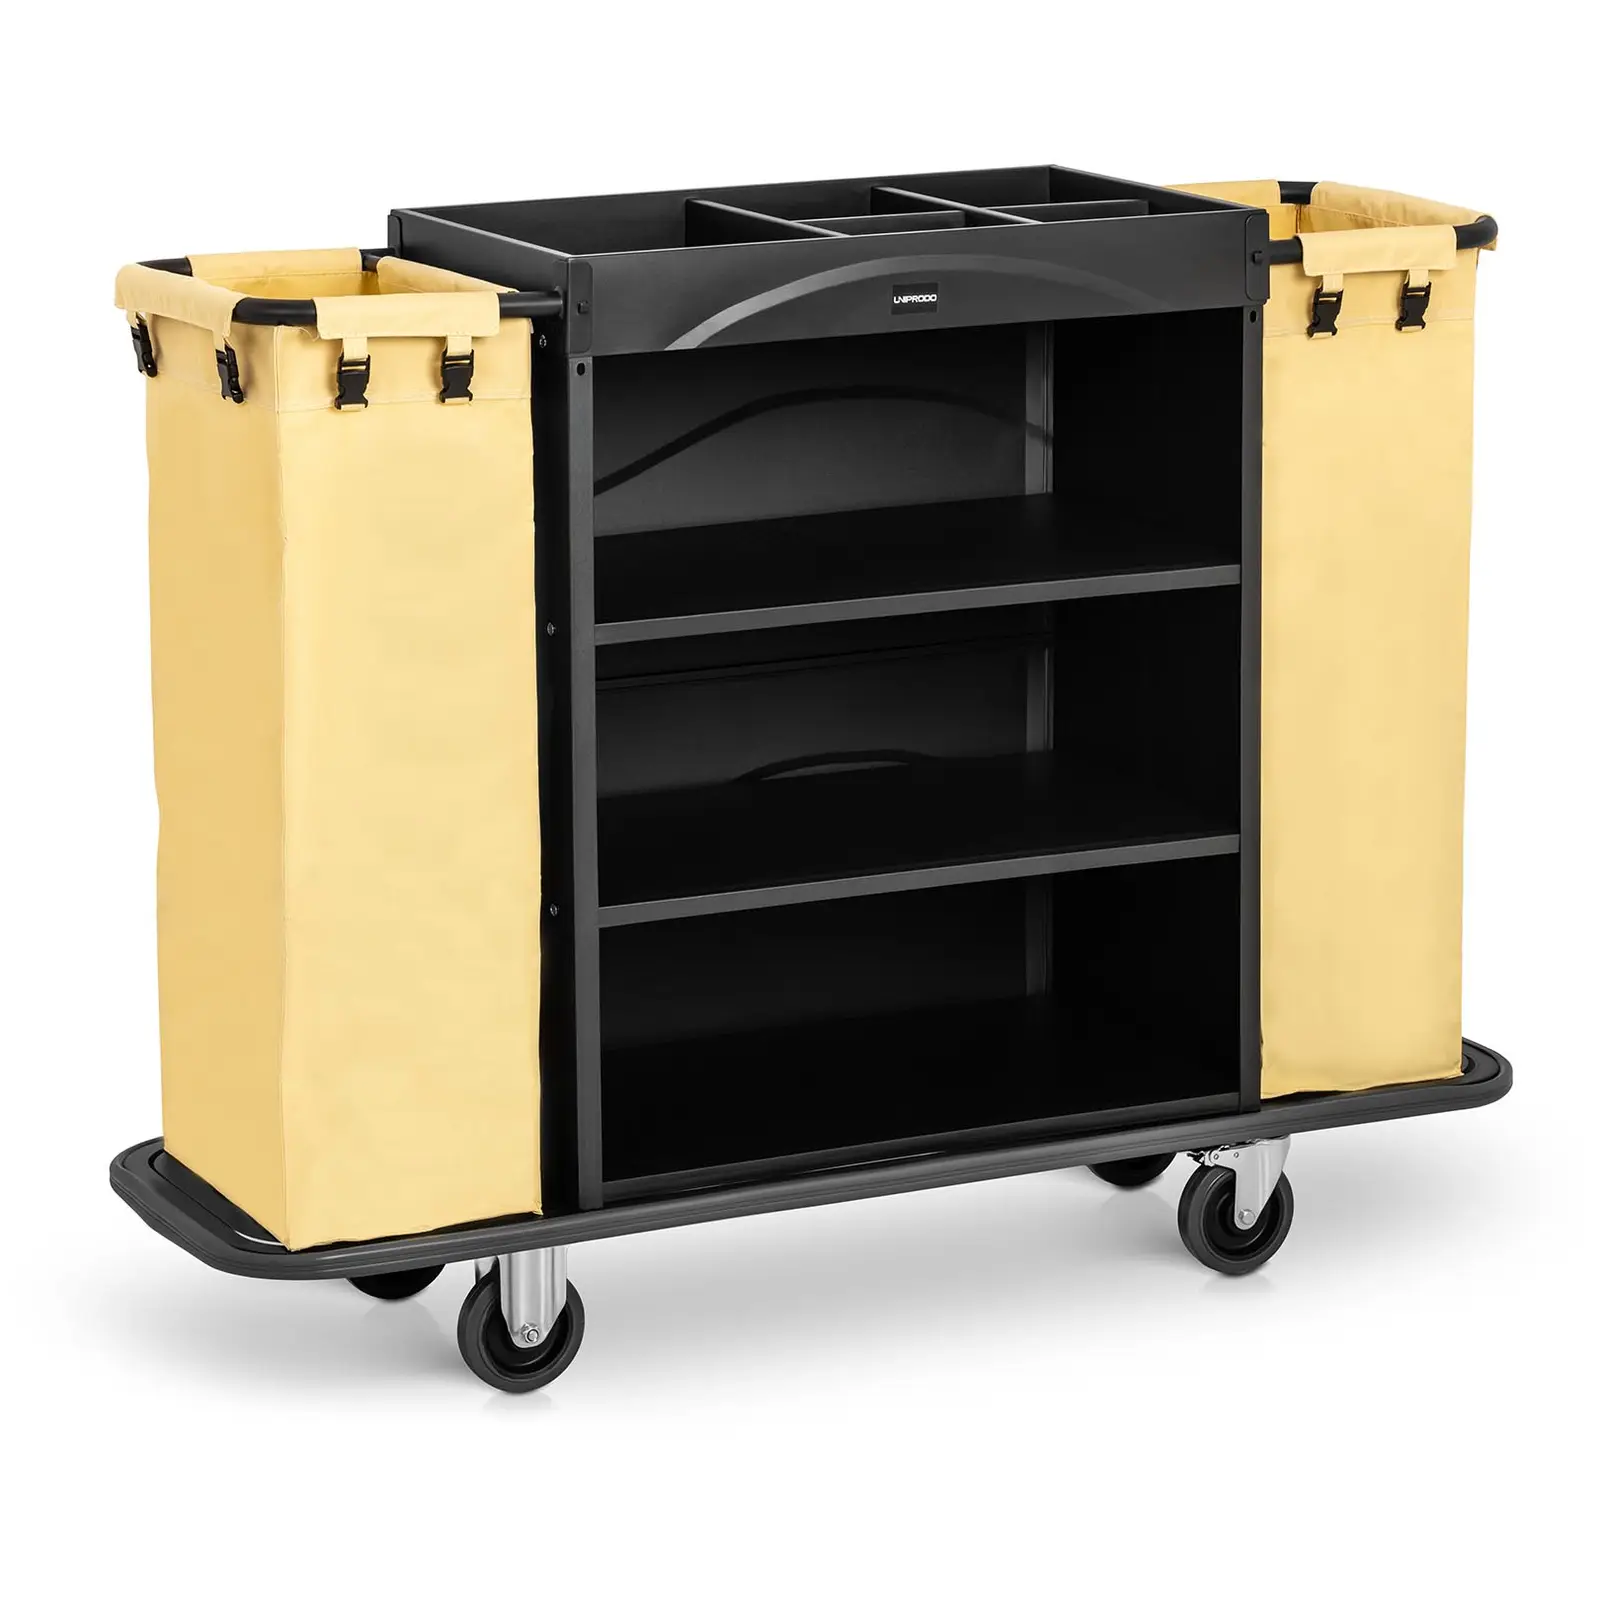 Hotel Service Trolley - 150 kg - 2 laundry bags